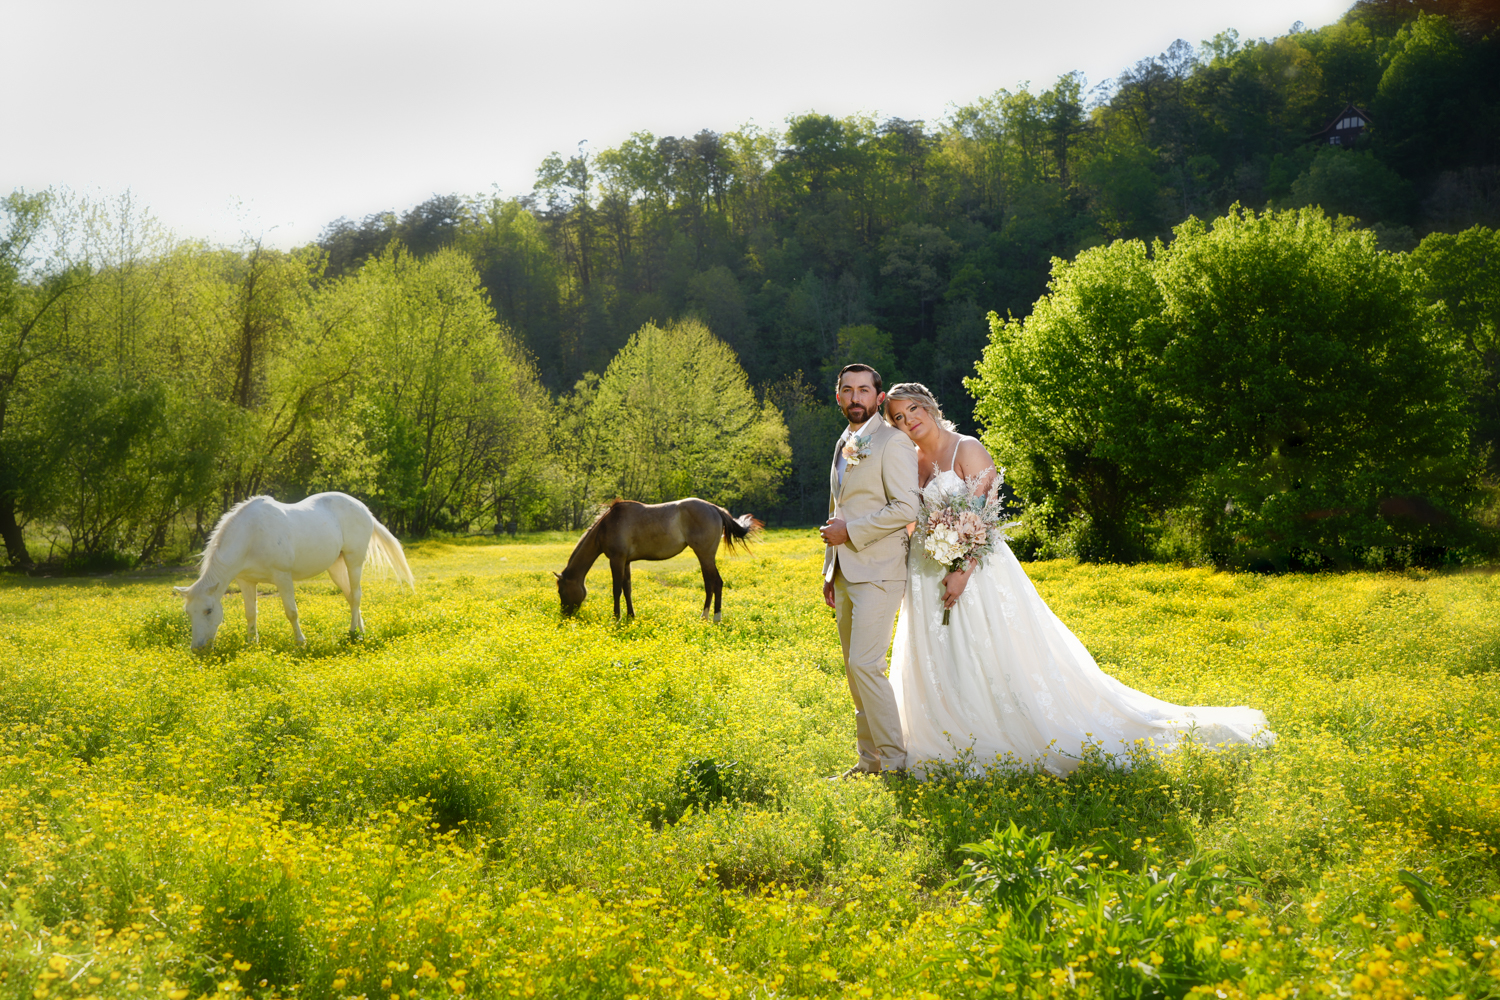 Bride leaning her head on her groom's shoulder in a field of yellow buttercups with a white and brown horse grazing in the distance at Honeysuckle Hills